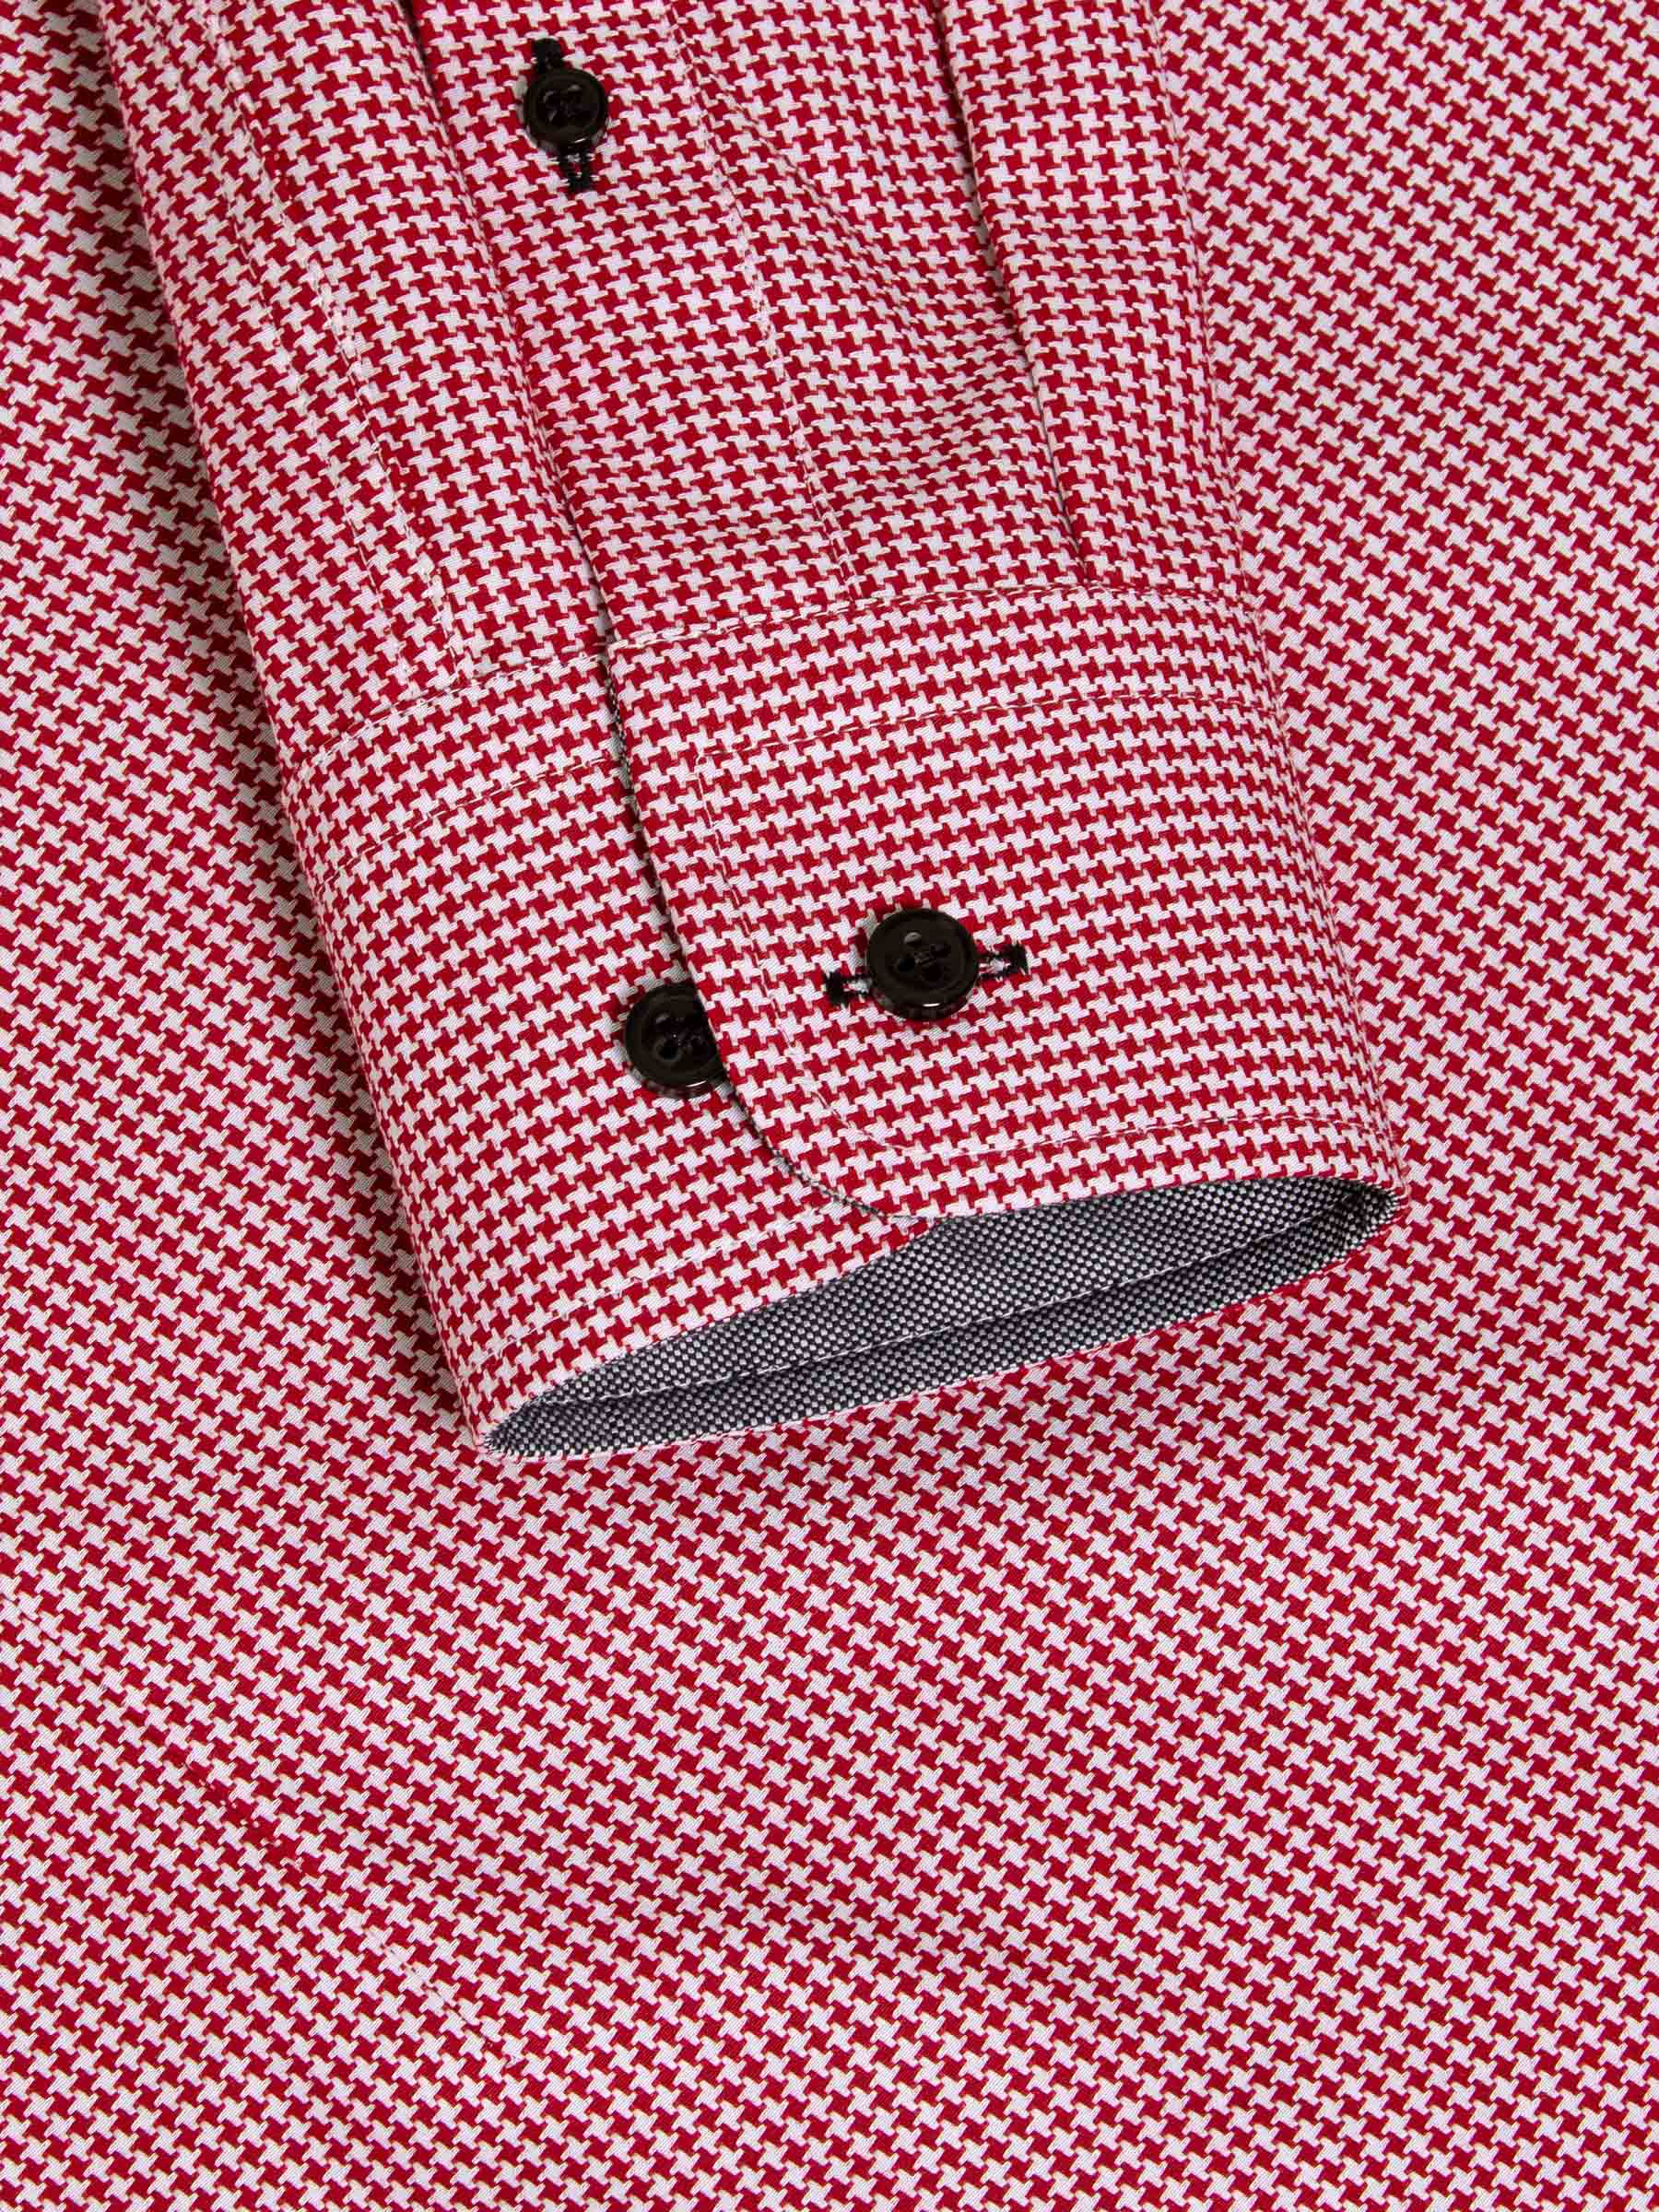 Vermilion Checkered Red Long Sleeve Shirt